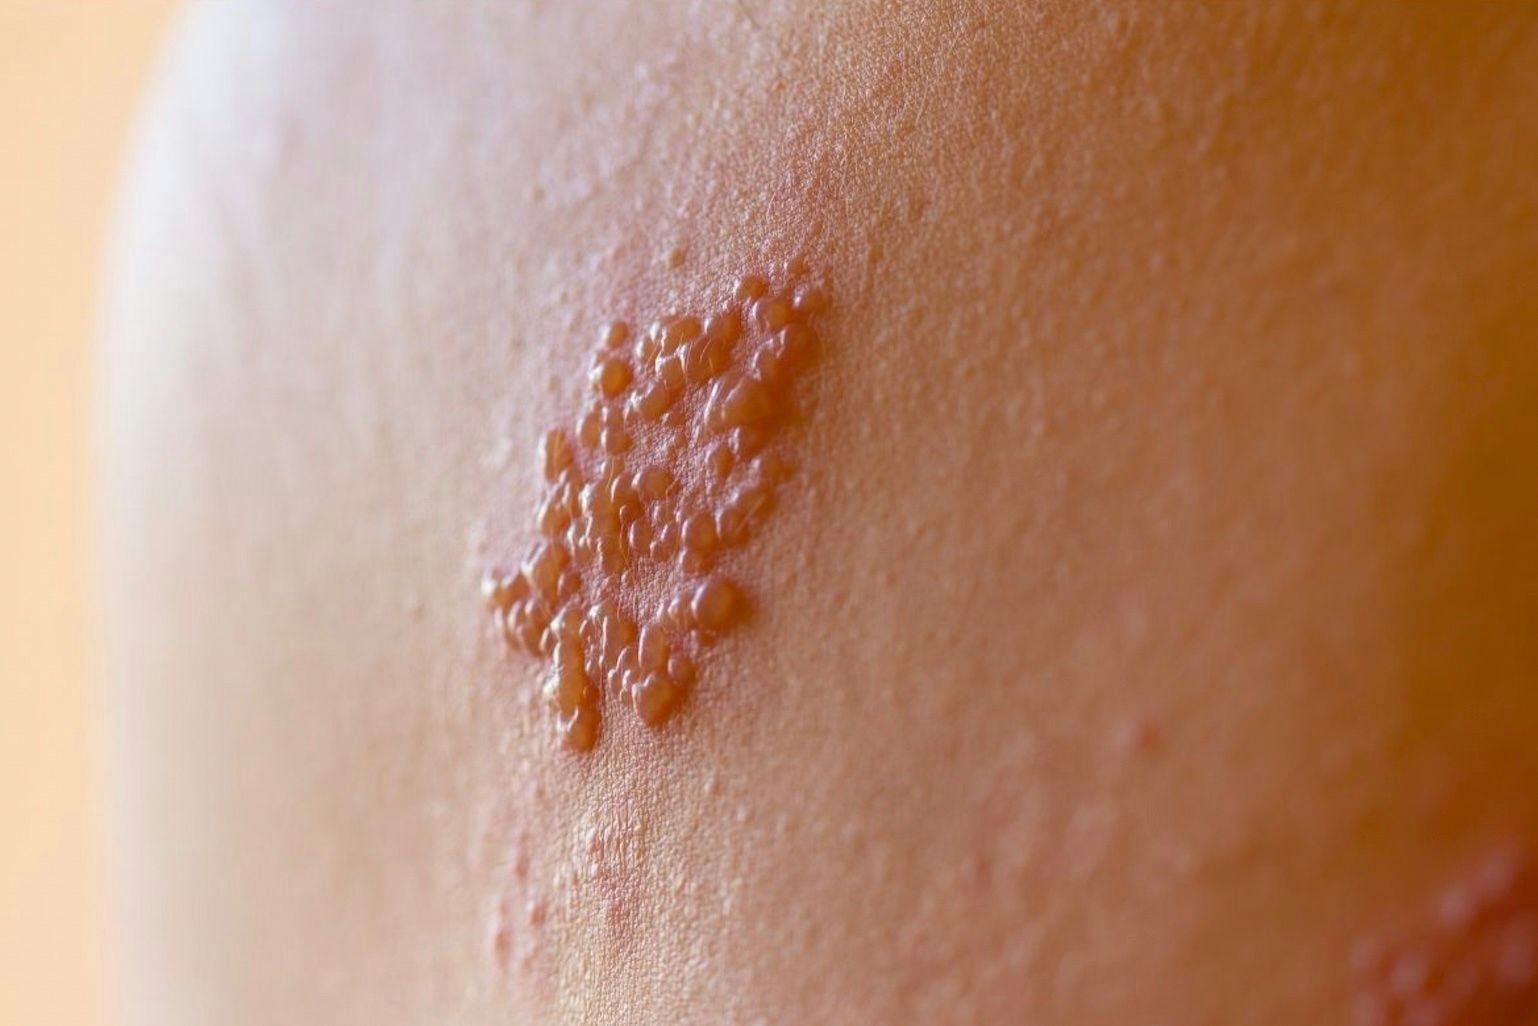 JAK Inhibitors May Increase Risk of Shingles in Patients With Immune-Mediated Inflammatory Diseases